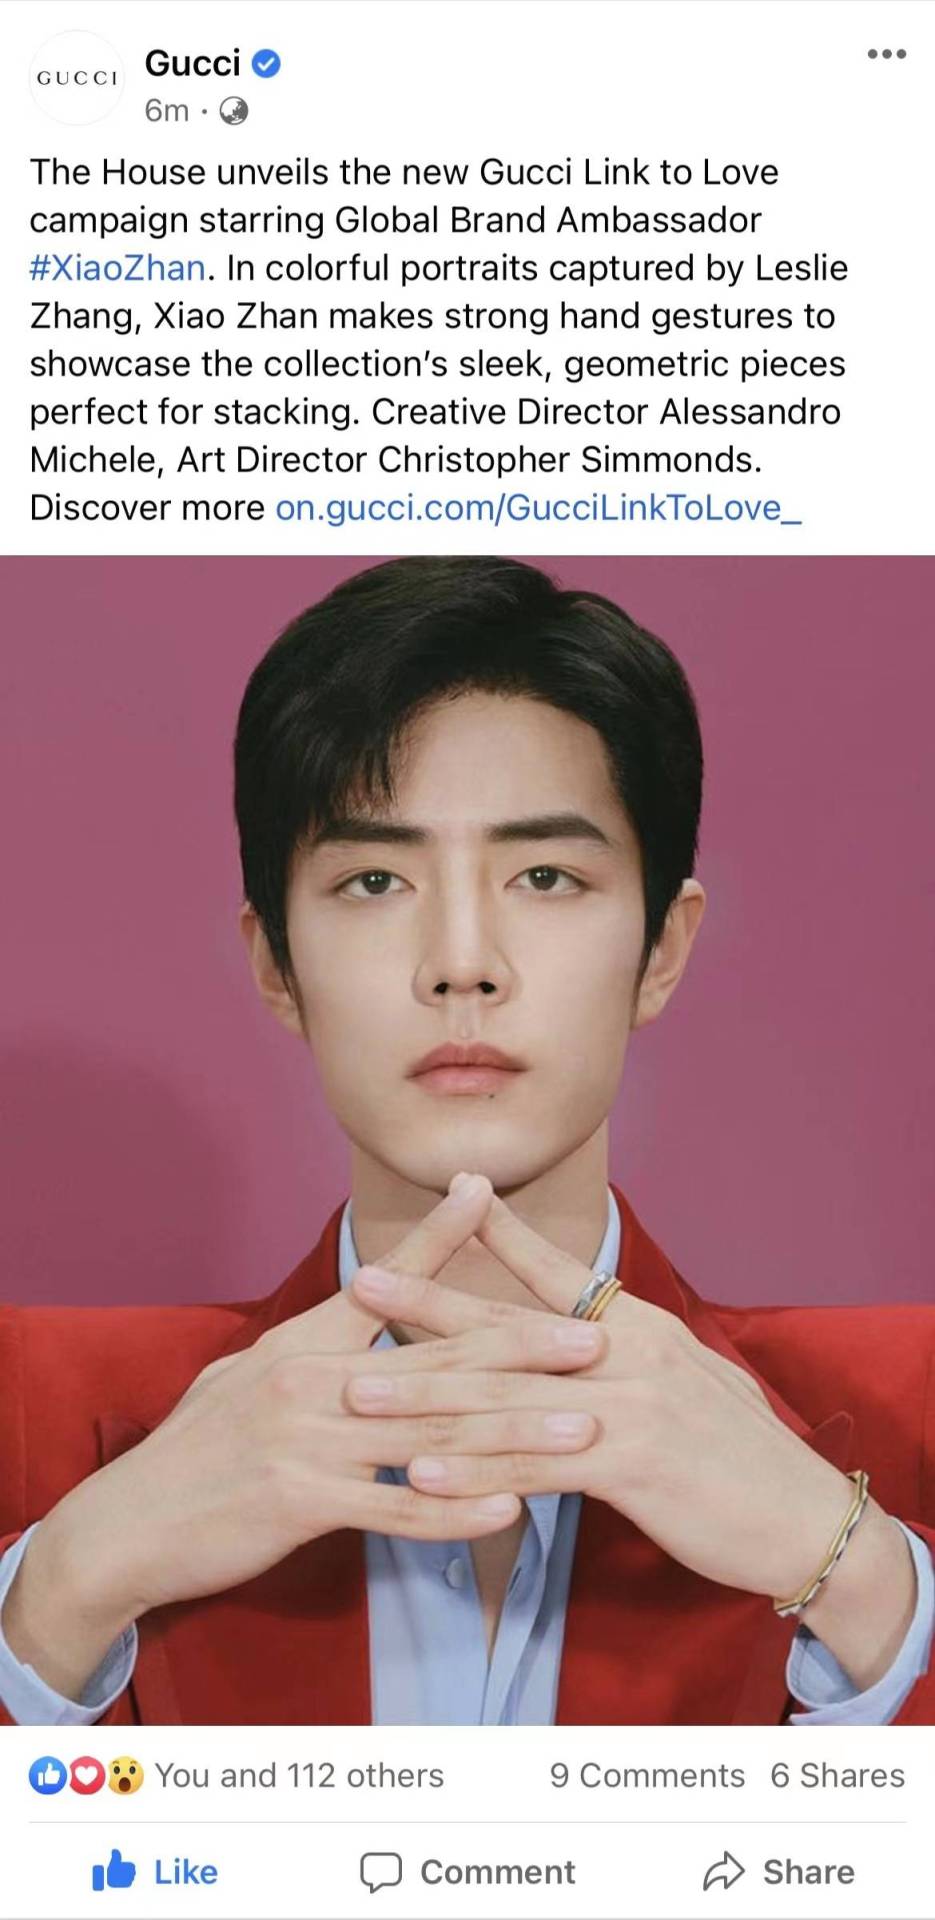 XIAO ZHAN is the New Brand Ambassador of GUCCI